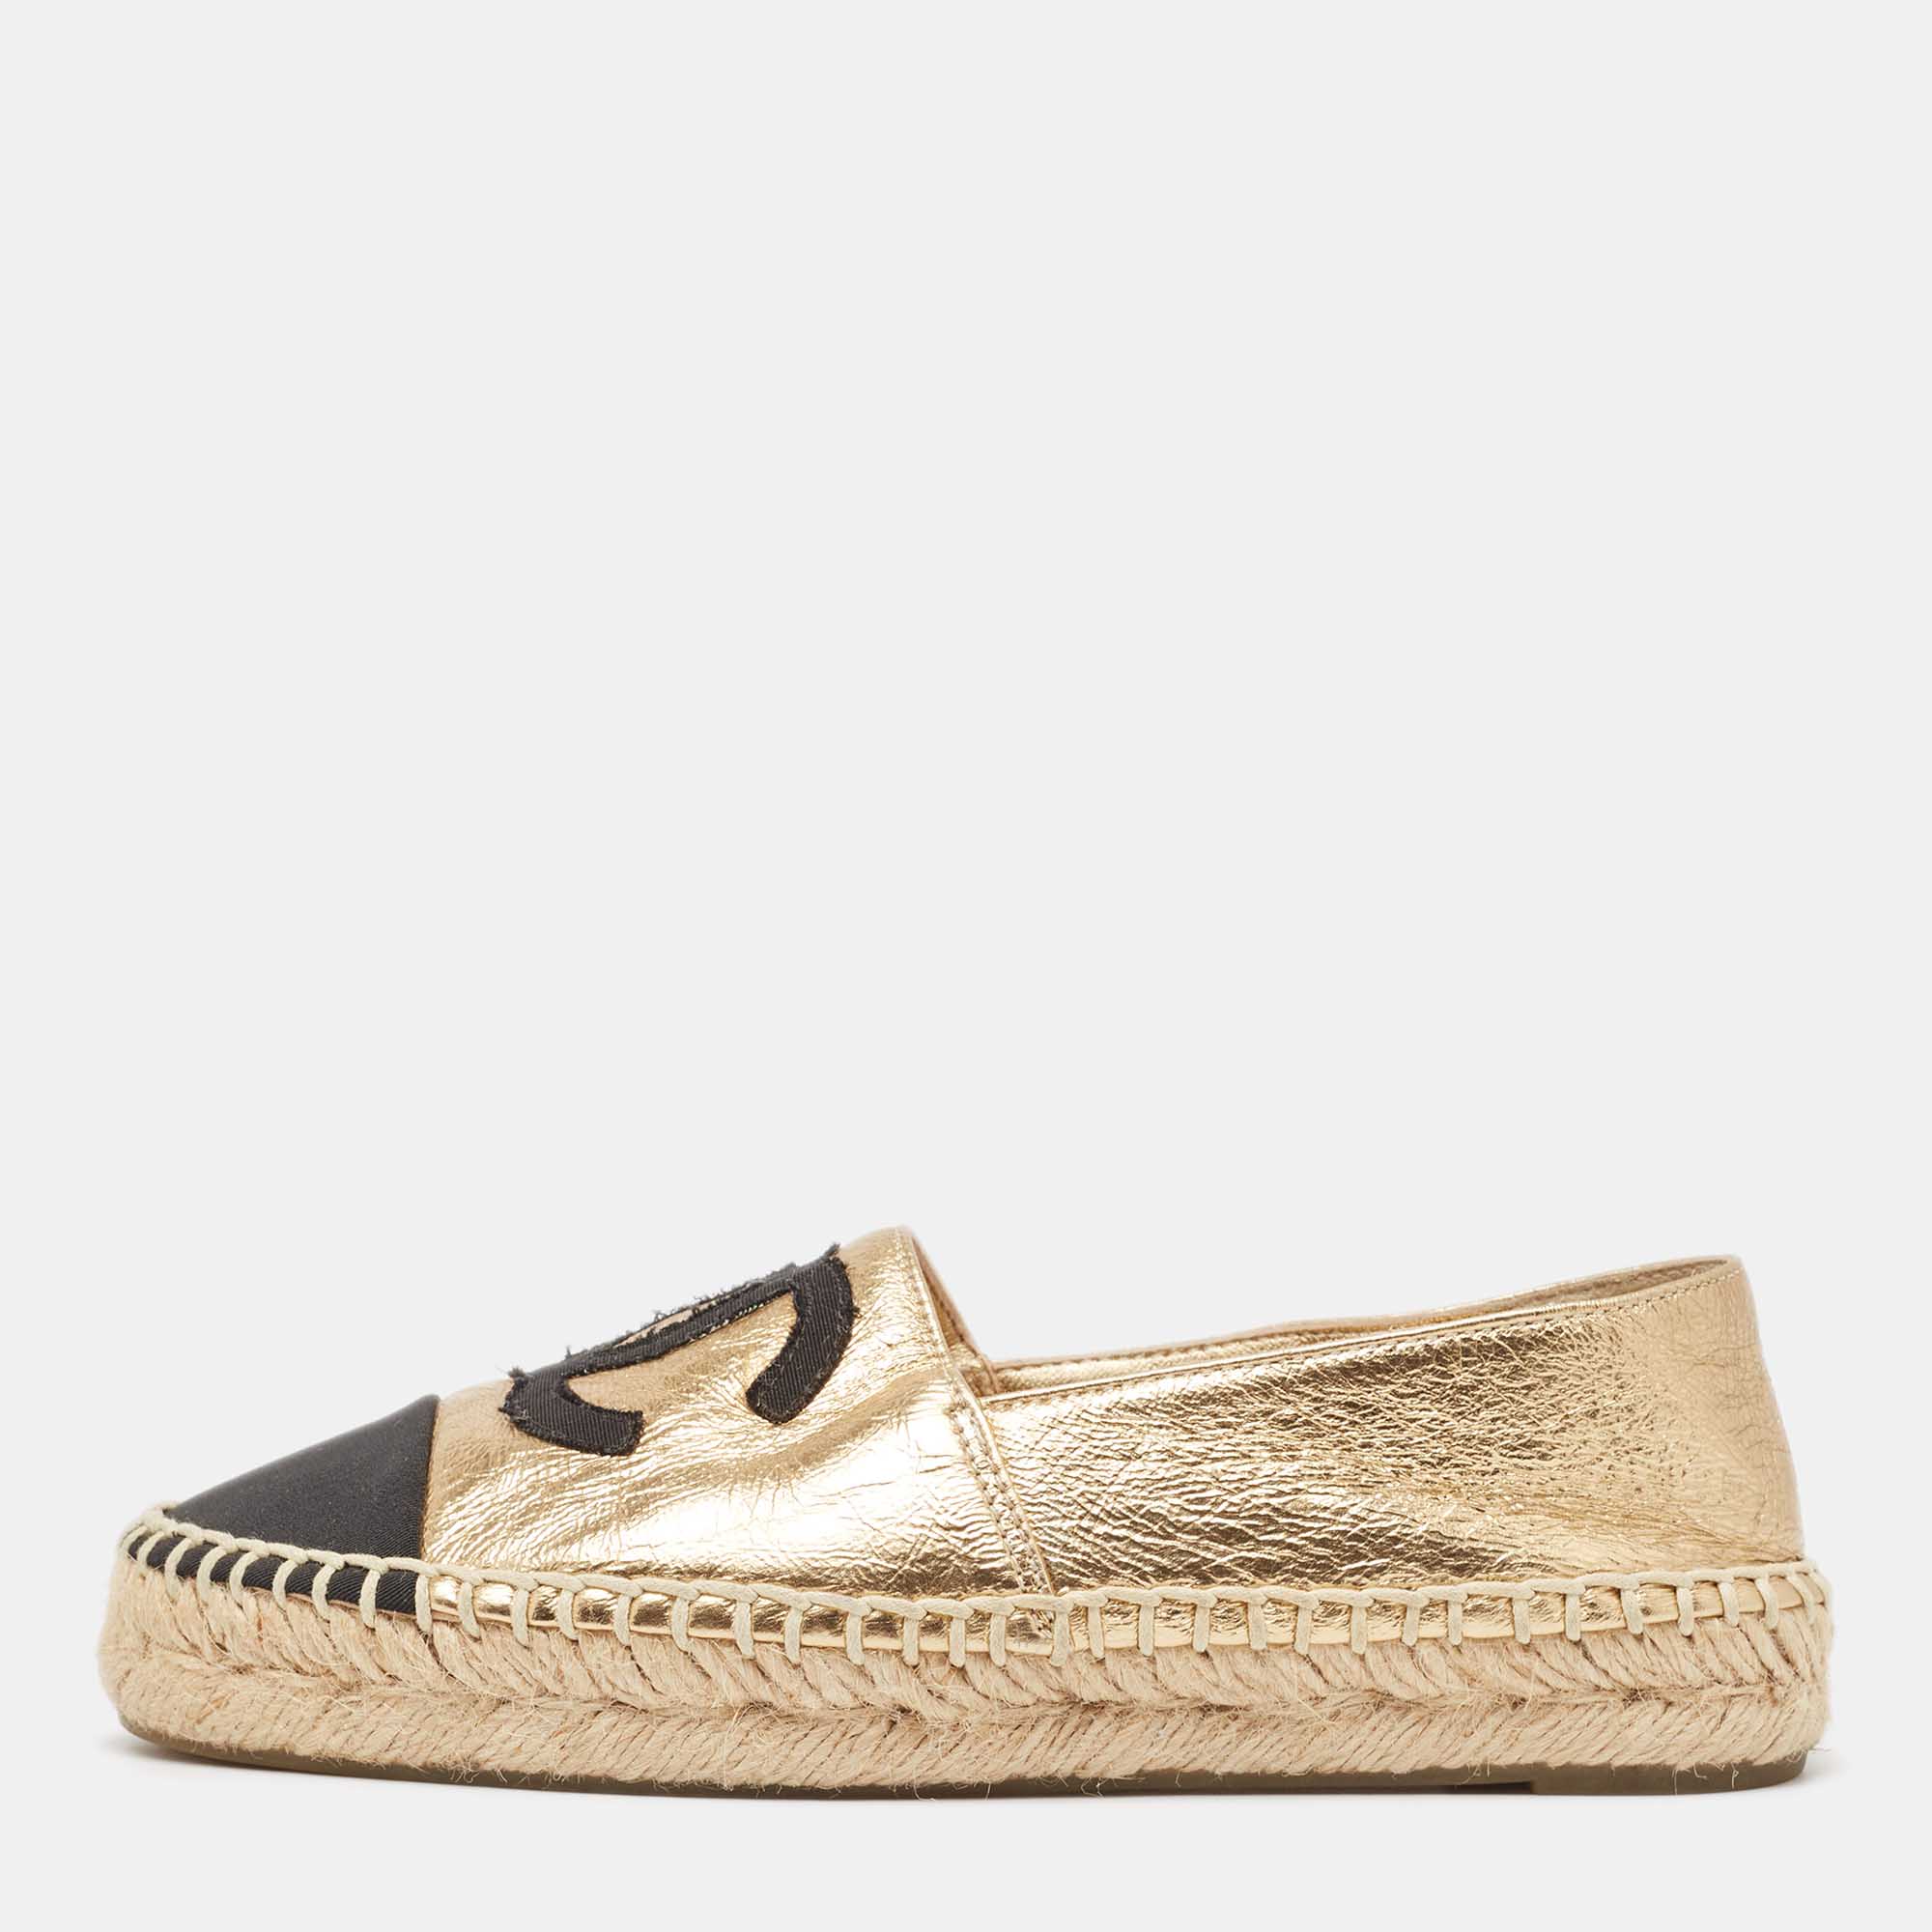 Chanel gold/black leather and canvas cc espadrille flats size 35